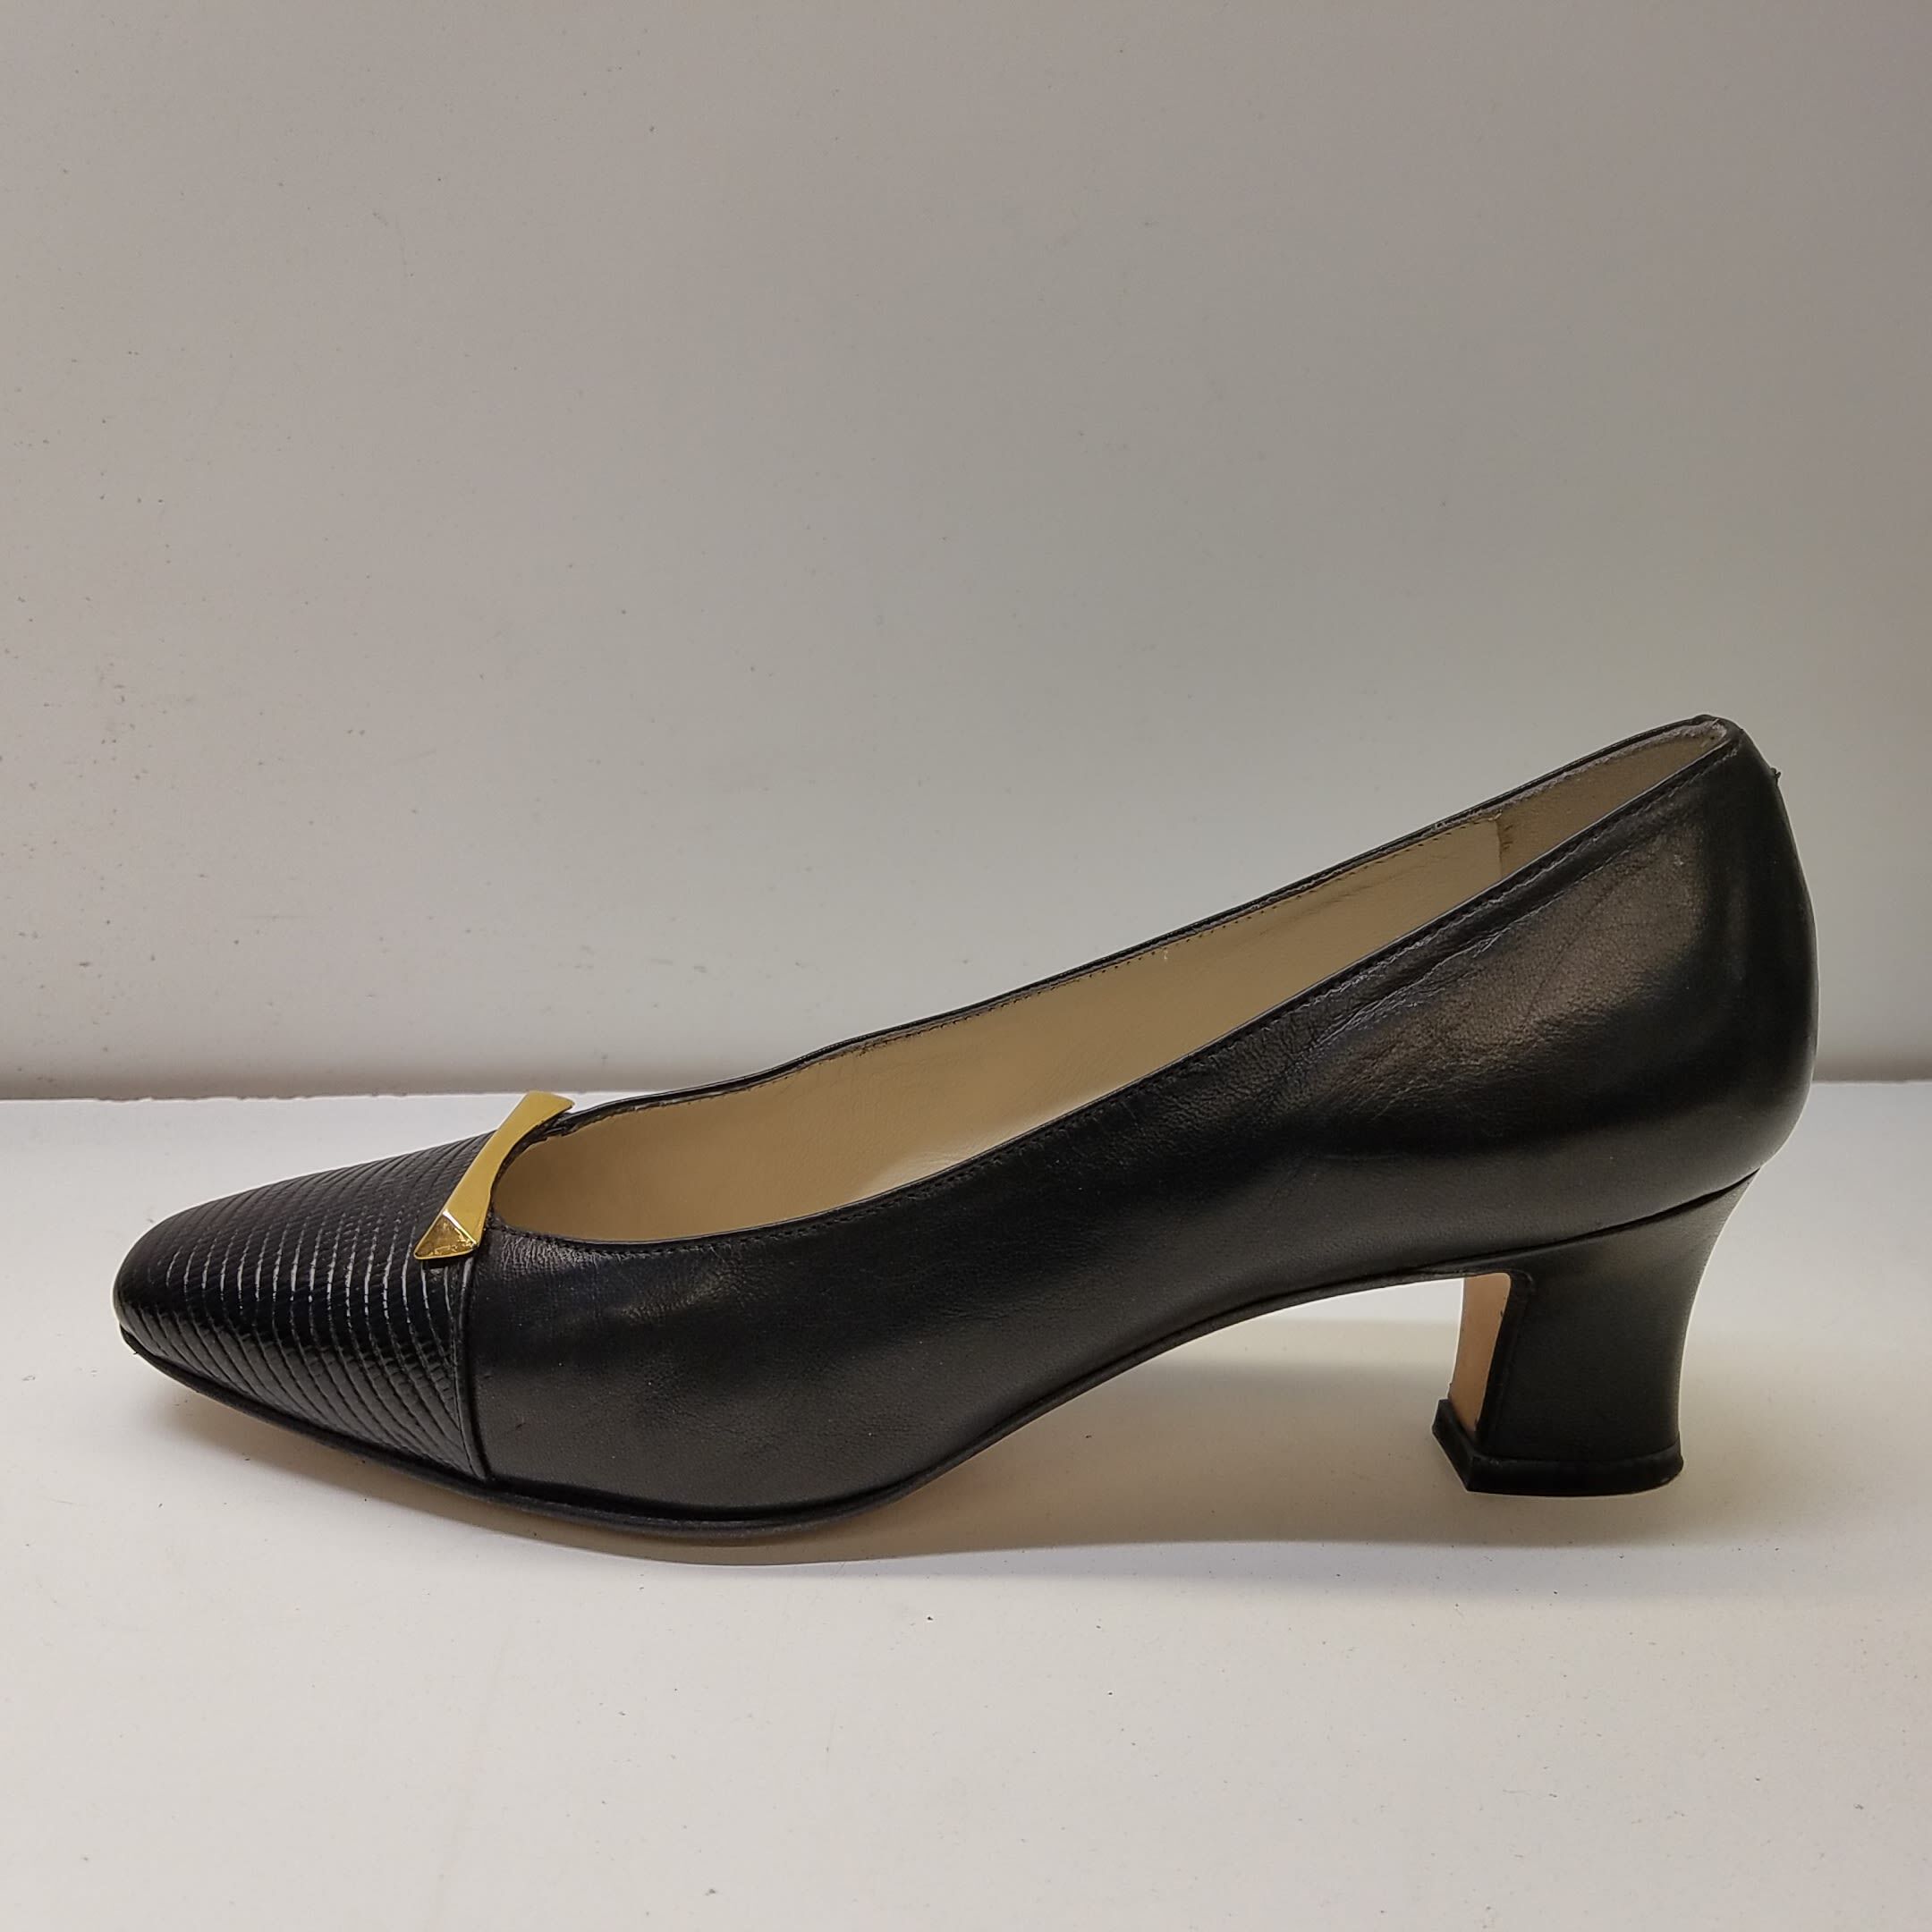 Bally Court Shoes Silla Heels 2 13/16in Black Leather 39.5 - Mint | eBay